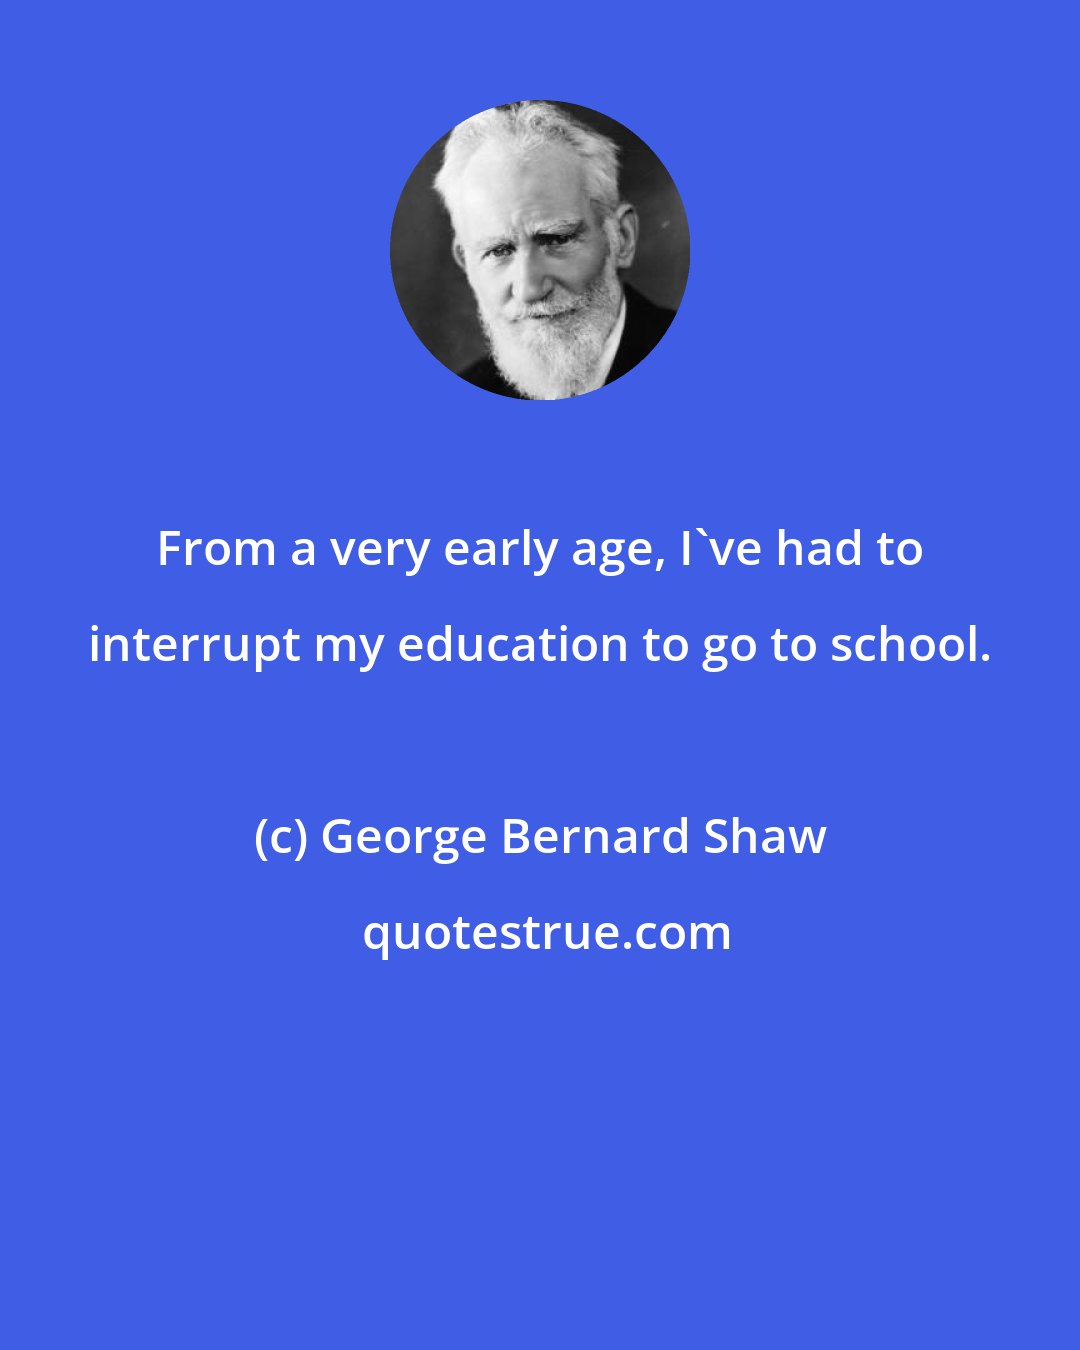 George Bernard Shaw: From a very early age, I've had to interrupt my education to go to school.